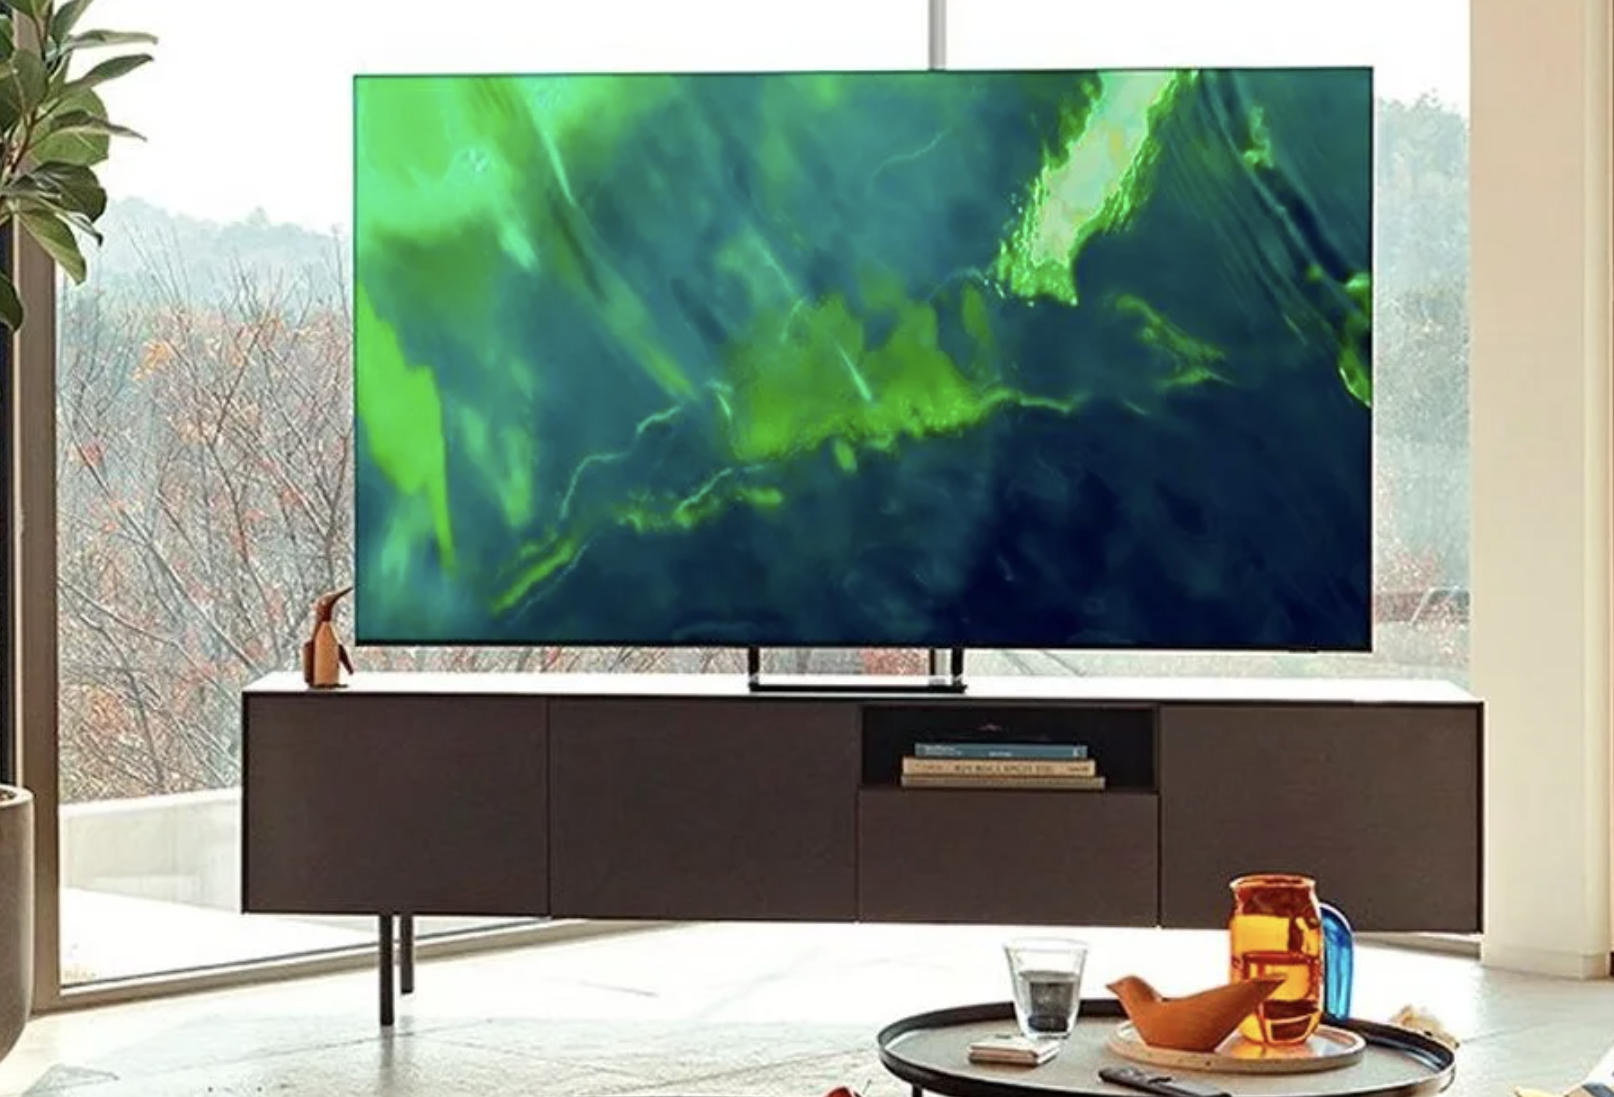 The Samsung Q70A Series QLED 4K TV in a living room.